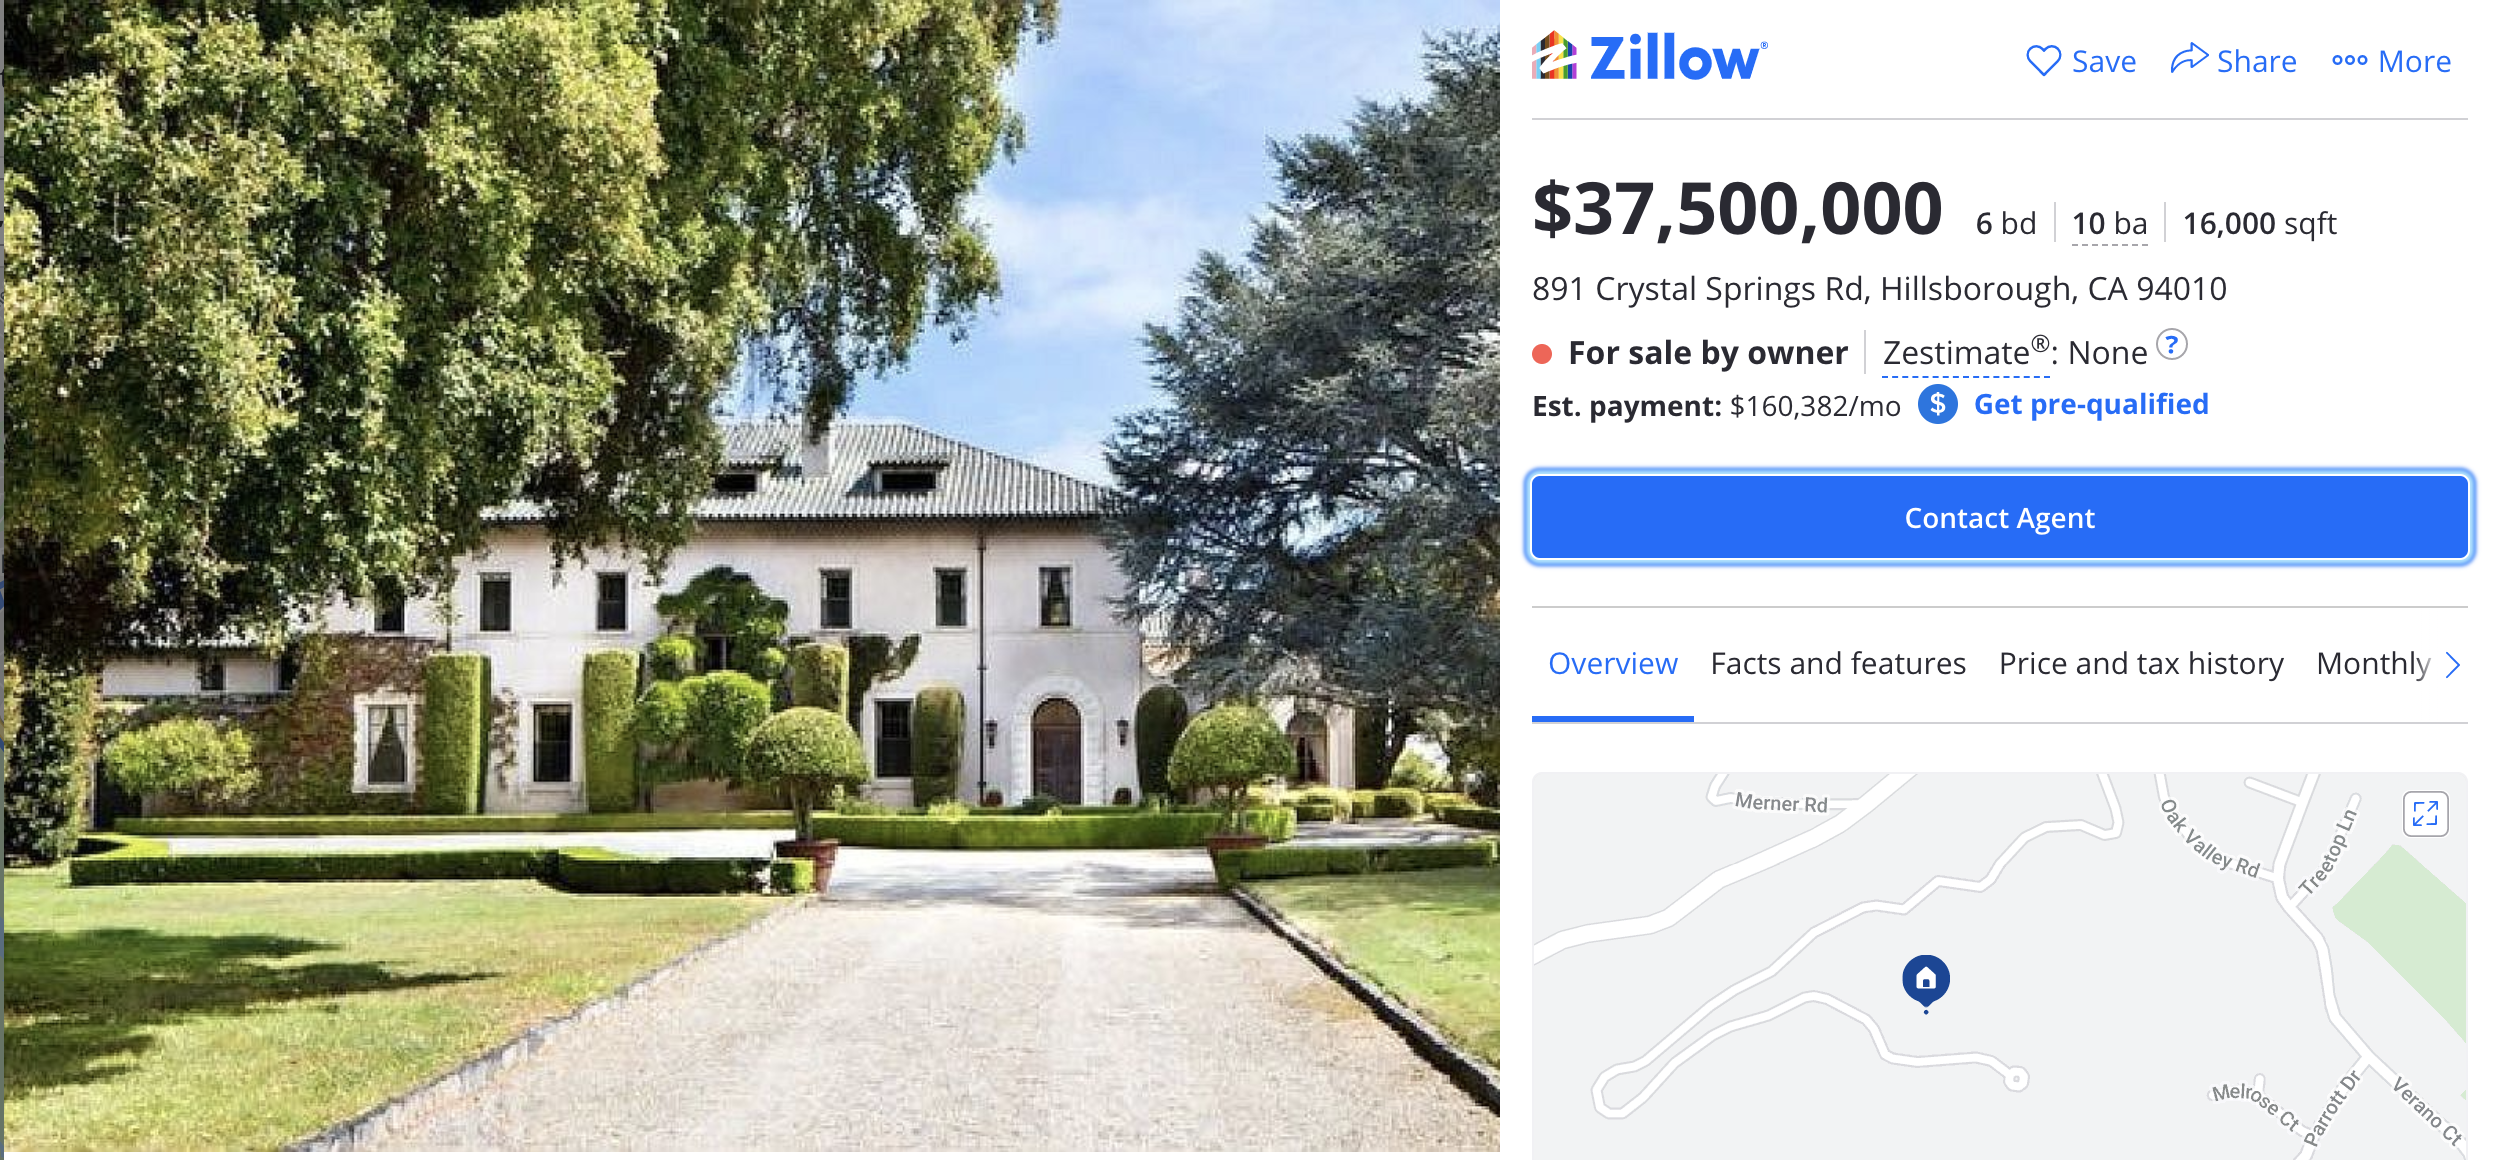 Elon Musk's Bay Area home in a Zillow listing.